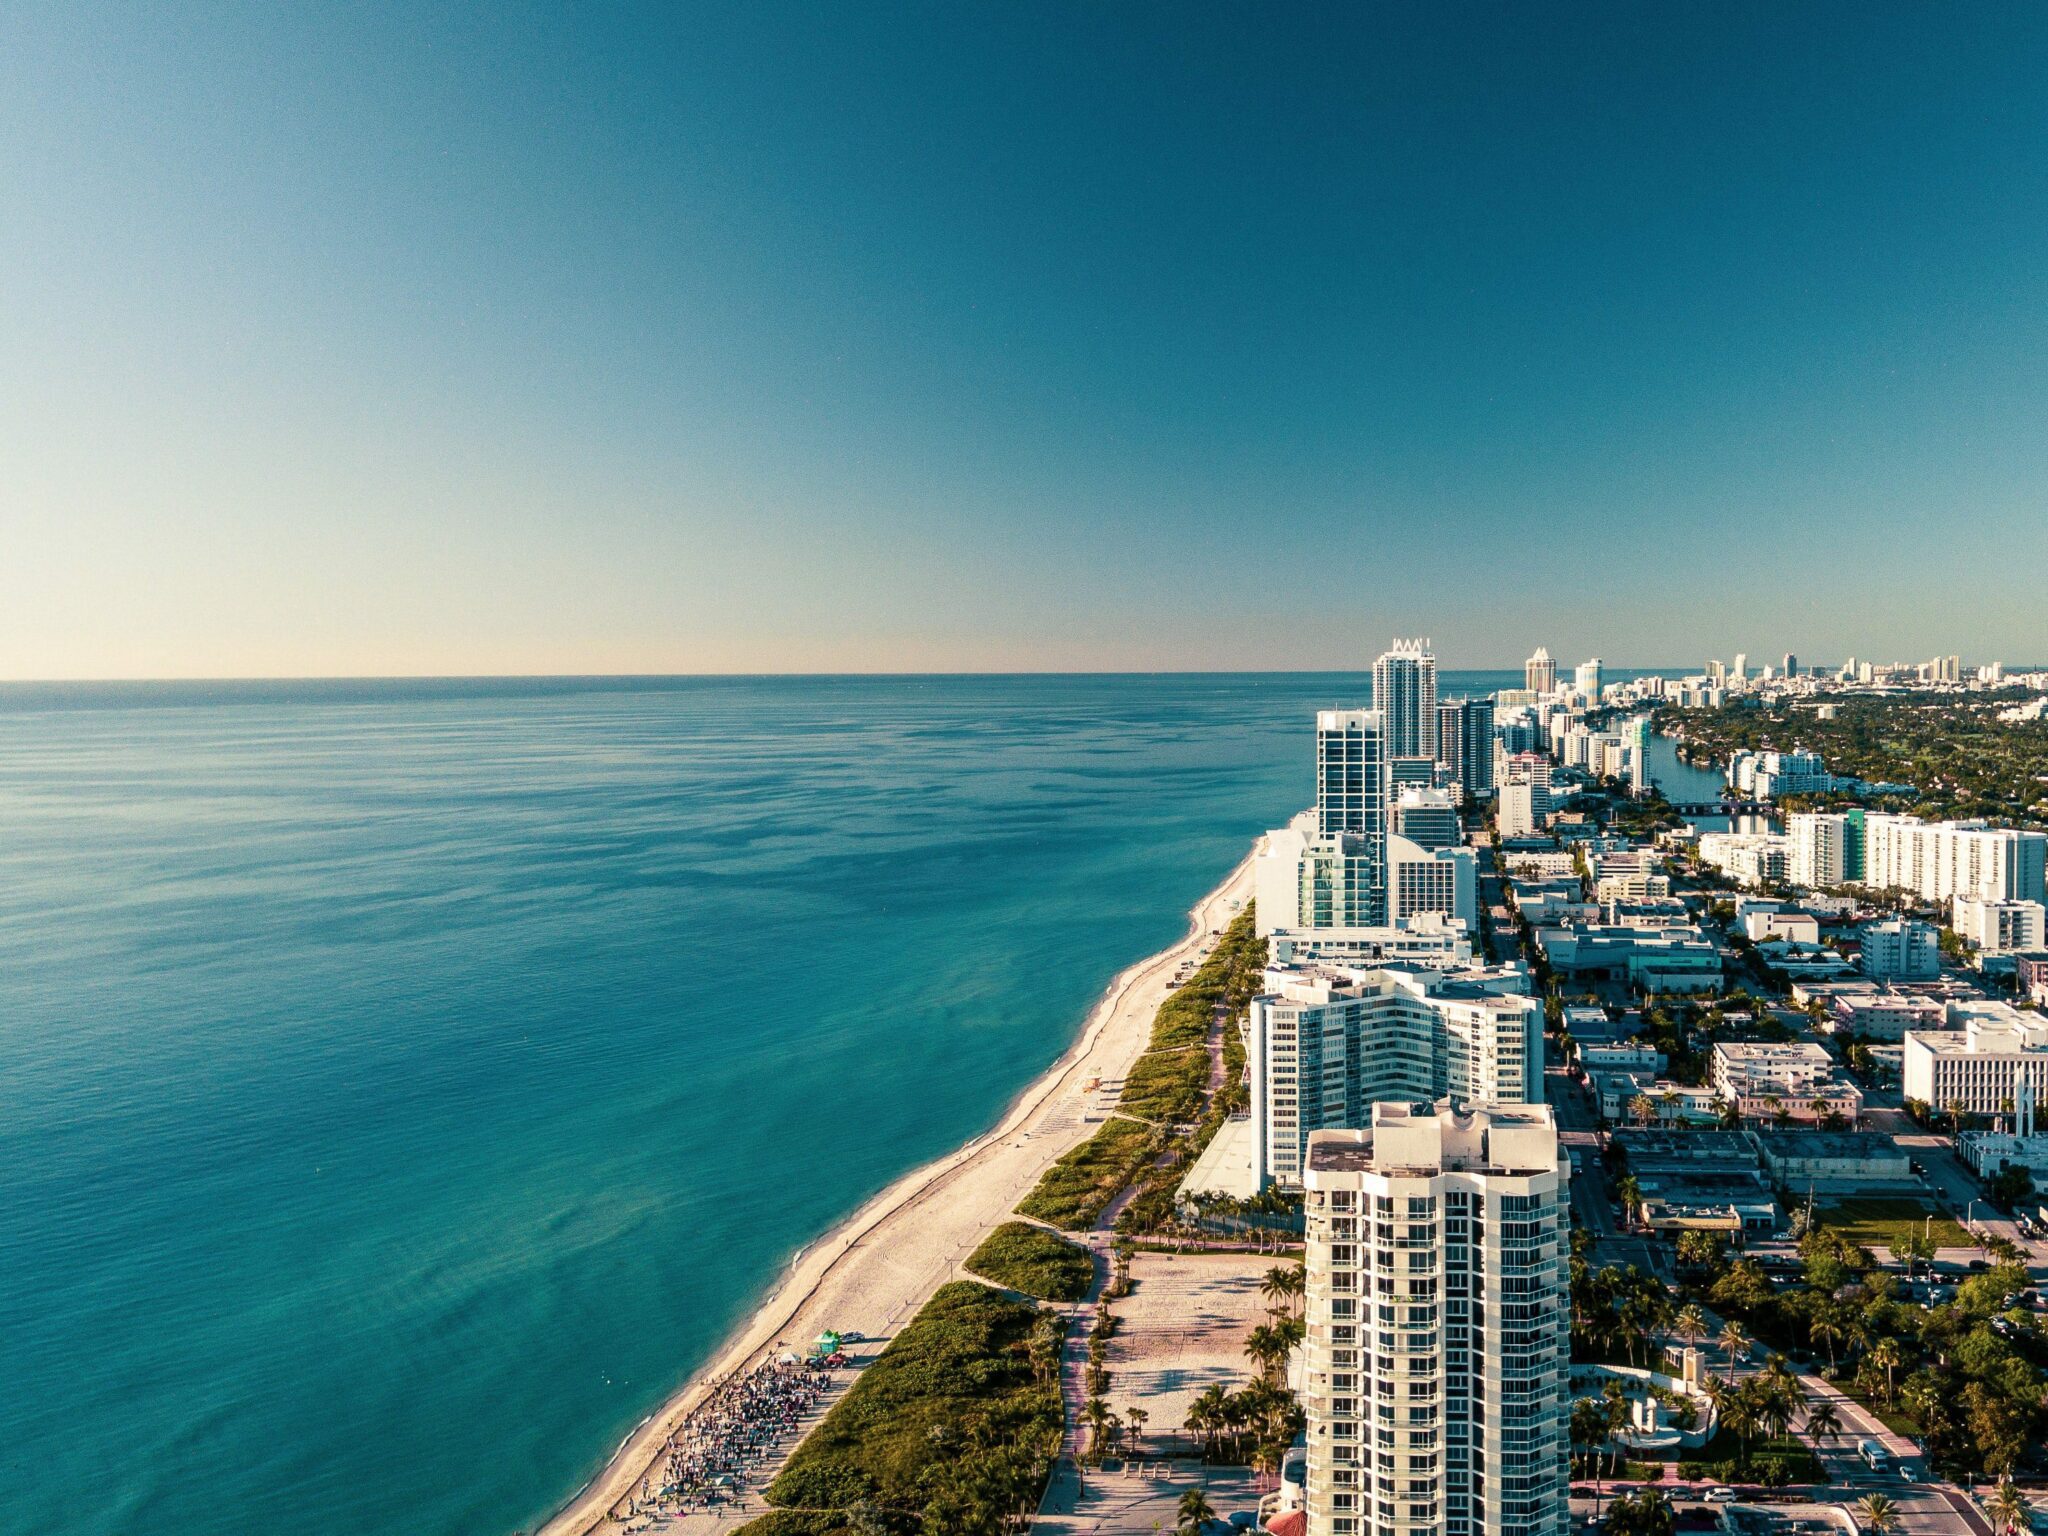 Image of the beach and beautiful sea with the Miami strip